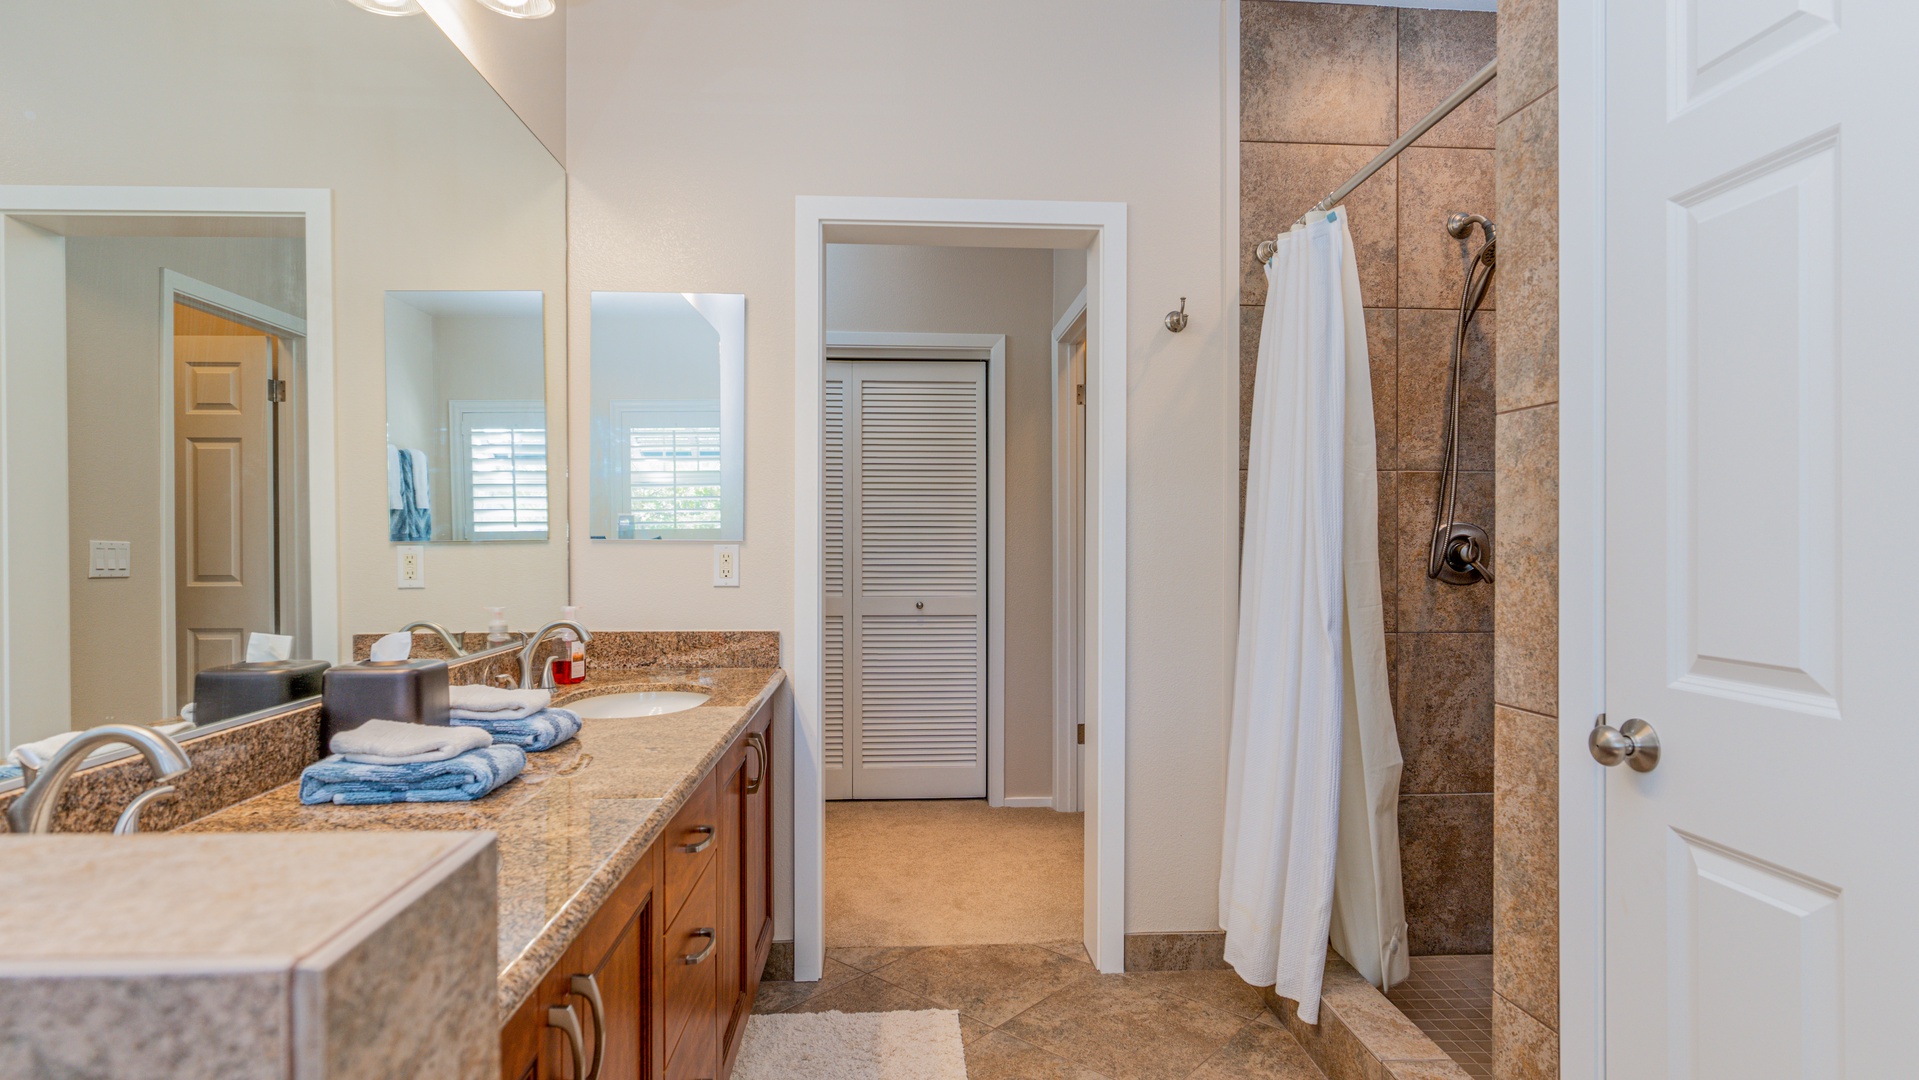 Kapolei Vacation Rentals, Coconut Plantation 1234-2 - The primary guest bath has a soaking tub and walk-in shower.